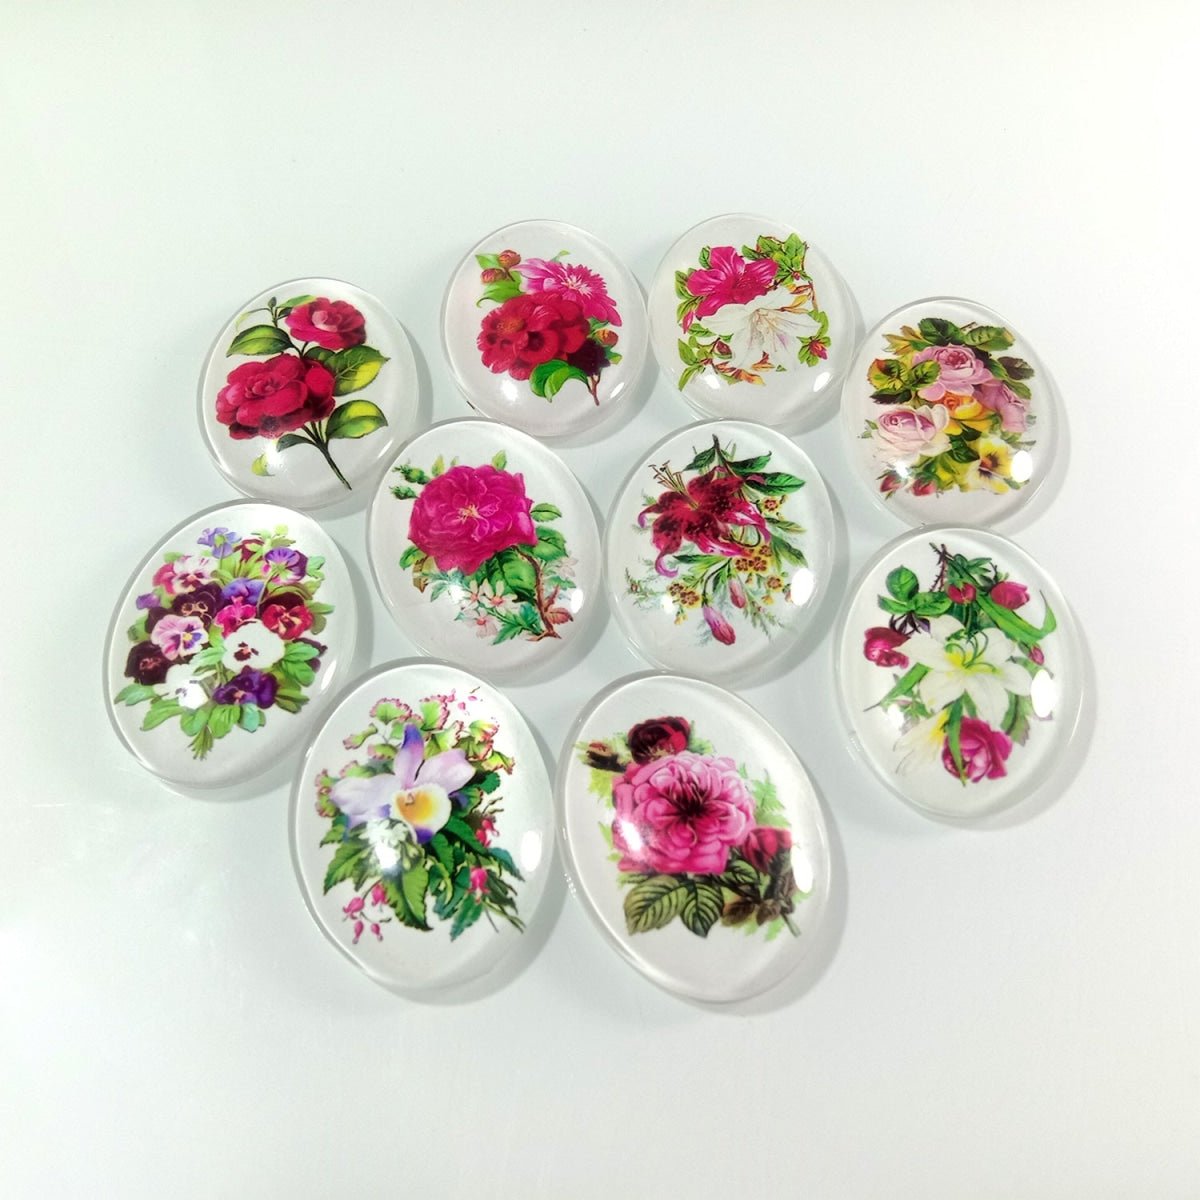 10pcs 13x18mm/18x25mm/30x40mm Oval Photo Glass Cabochon Vintage Flowers Rose Daisy Flat Back - 18x25mm White - - Asia Sell